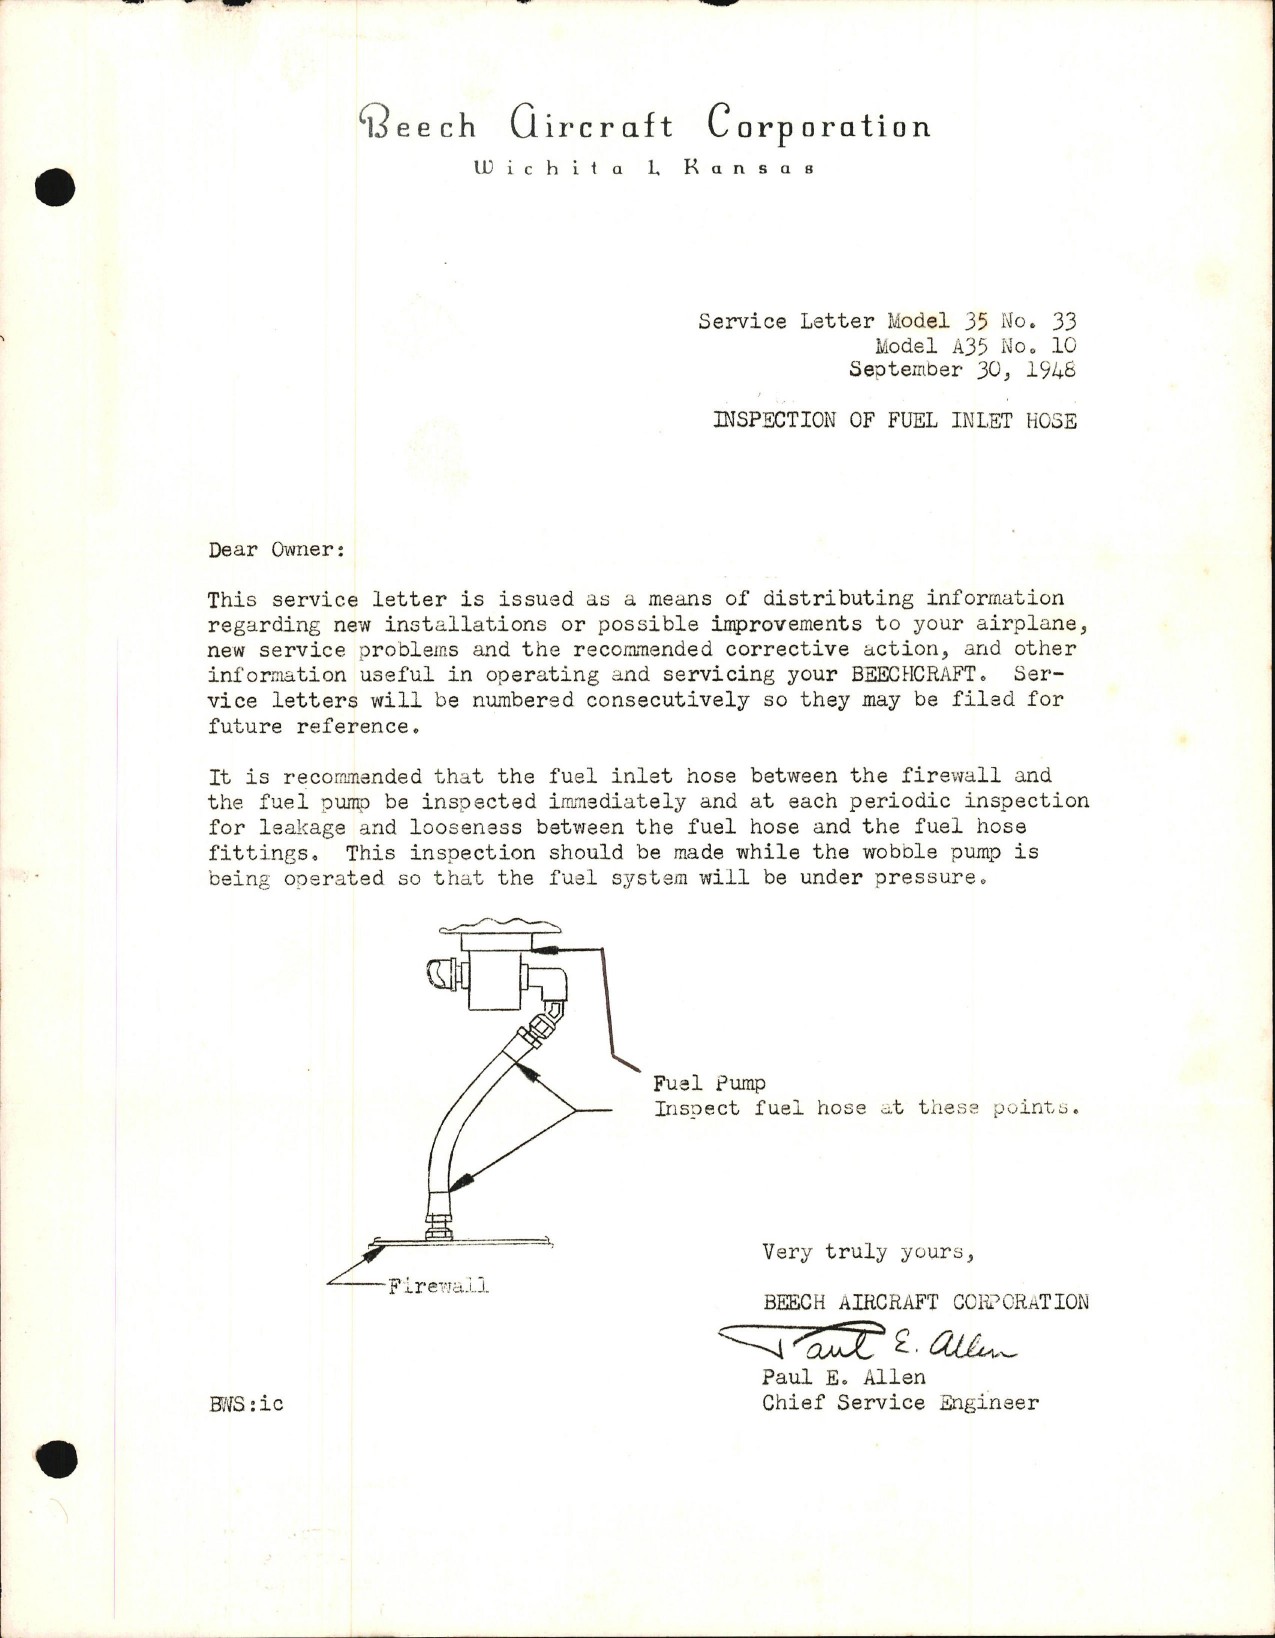 Sample page 1 from AirCorps Library document: Inspection of Fuel Inlet Hose